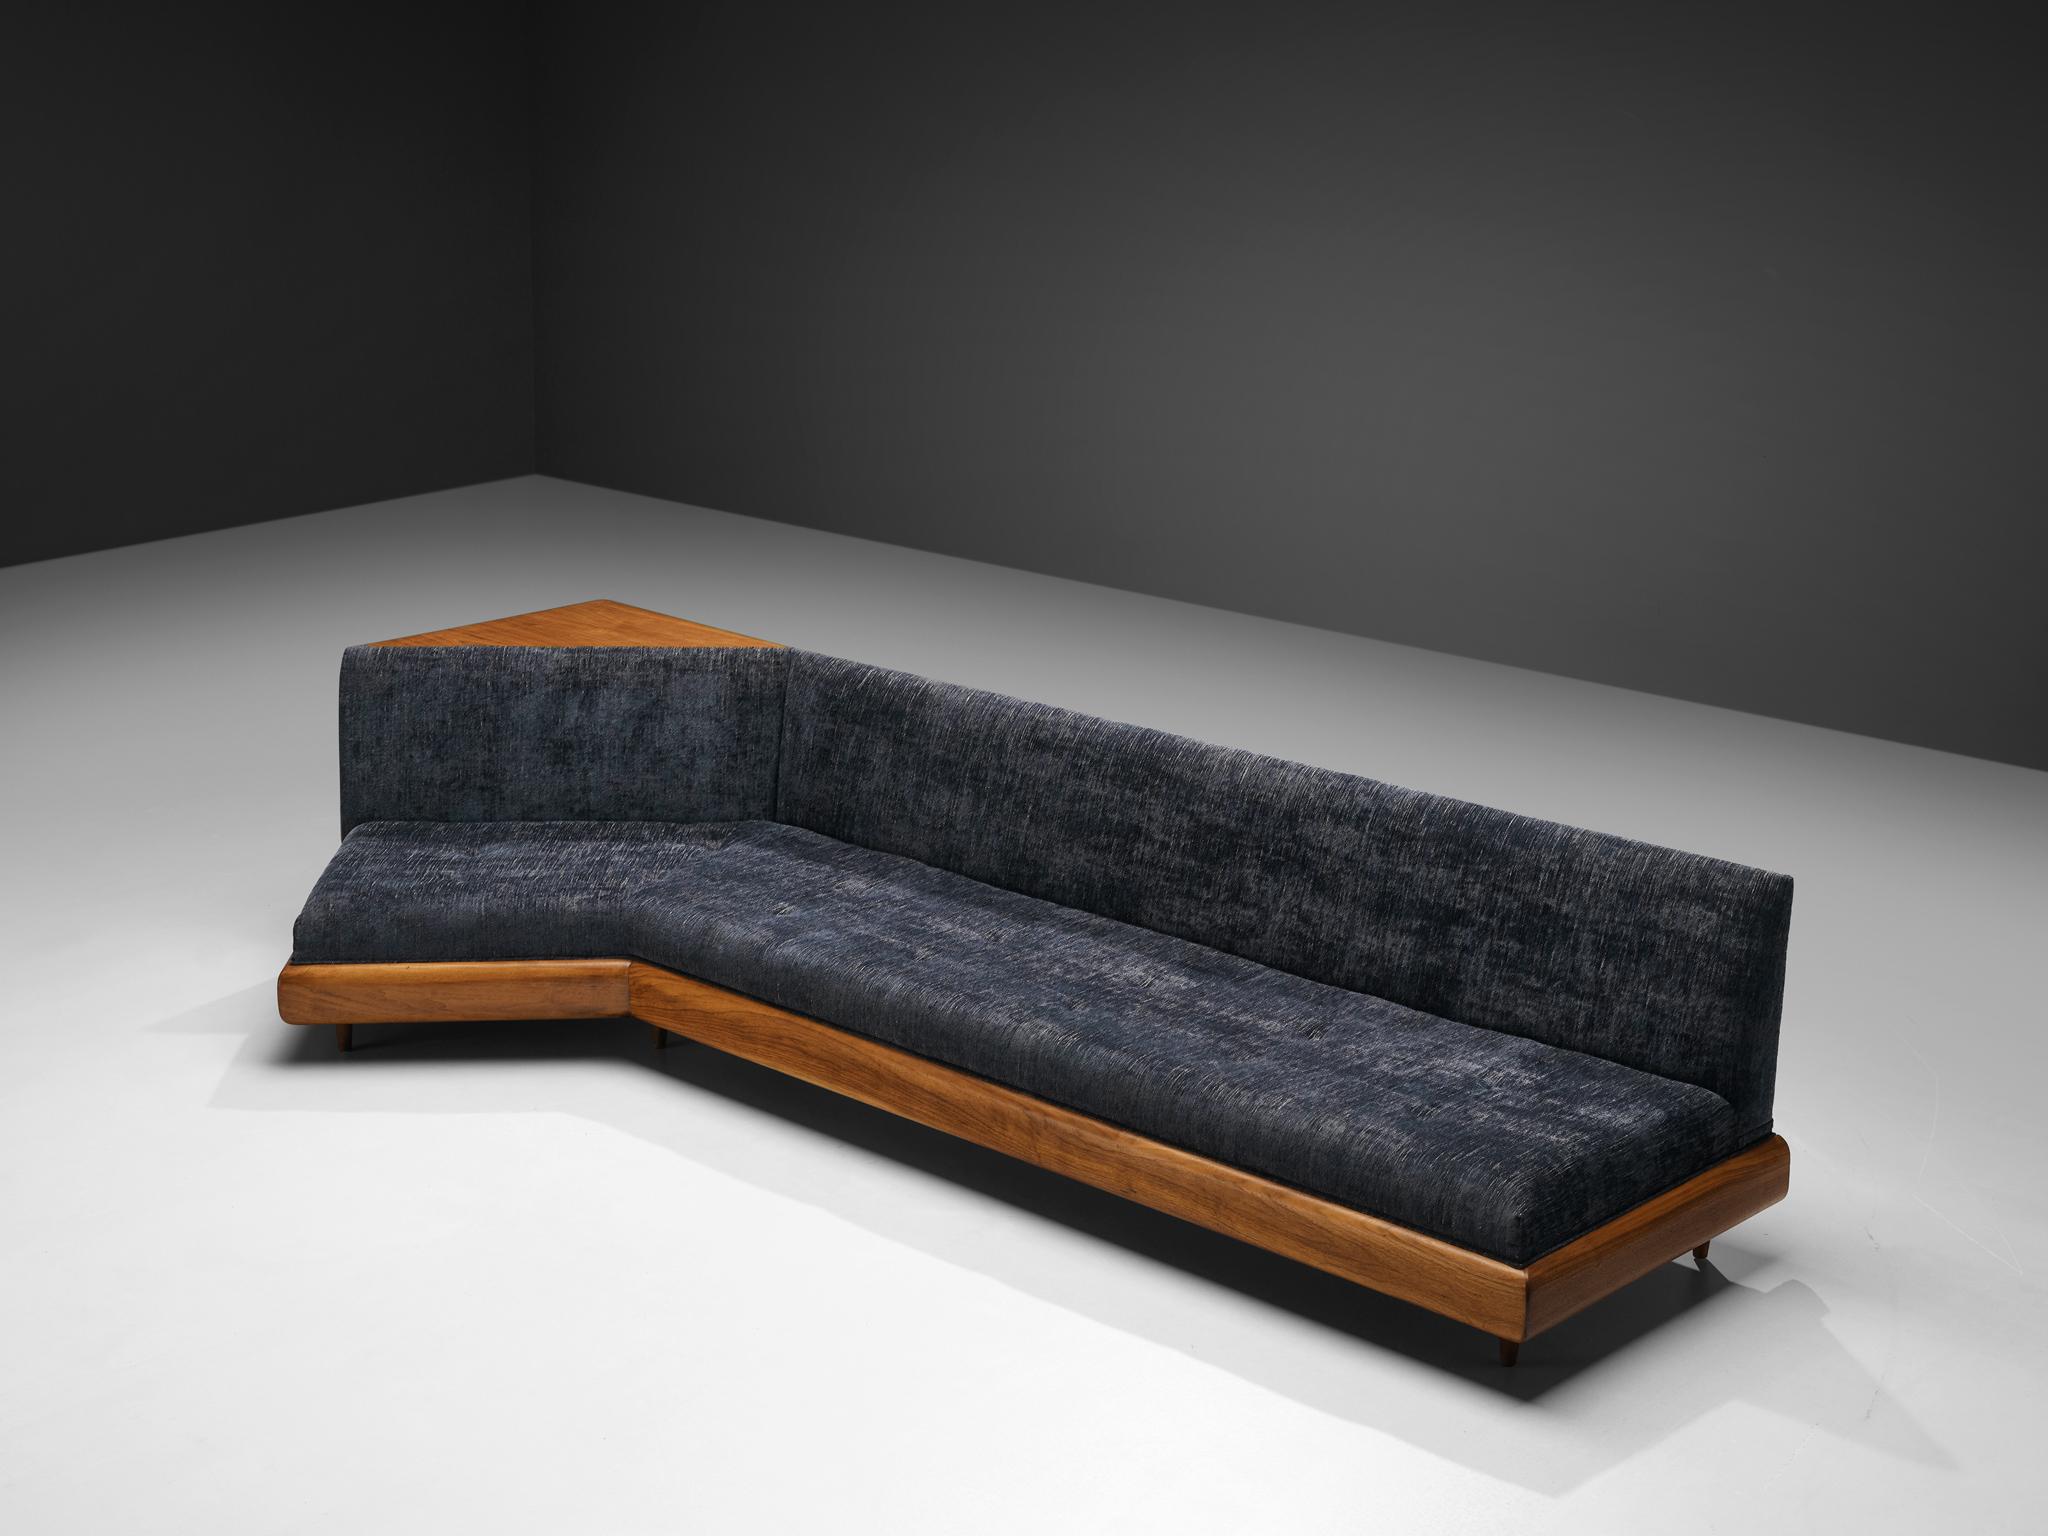 Adrian Pearsall, sofa model '2167S', fabric, walnut, United States, 1960s

This 'boomerang' sofa has a unique shape with sharp and geometrical lines that create an almost monumental look. The walnut compartment on top echoes the general shape of the